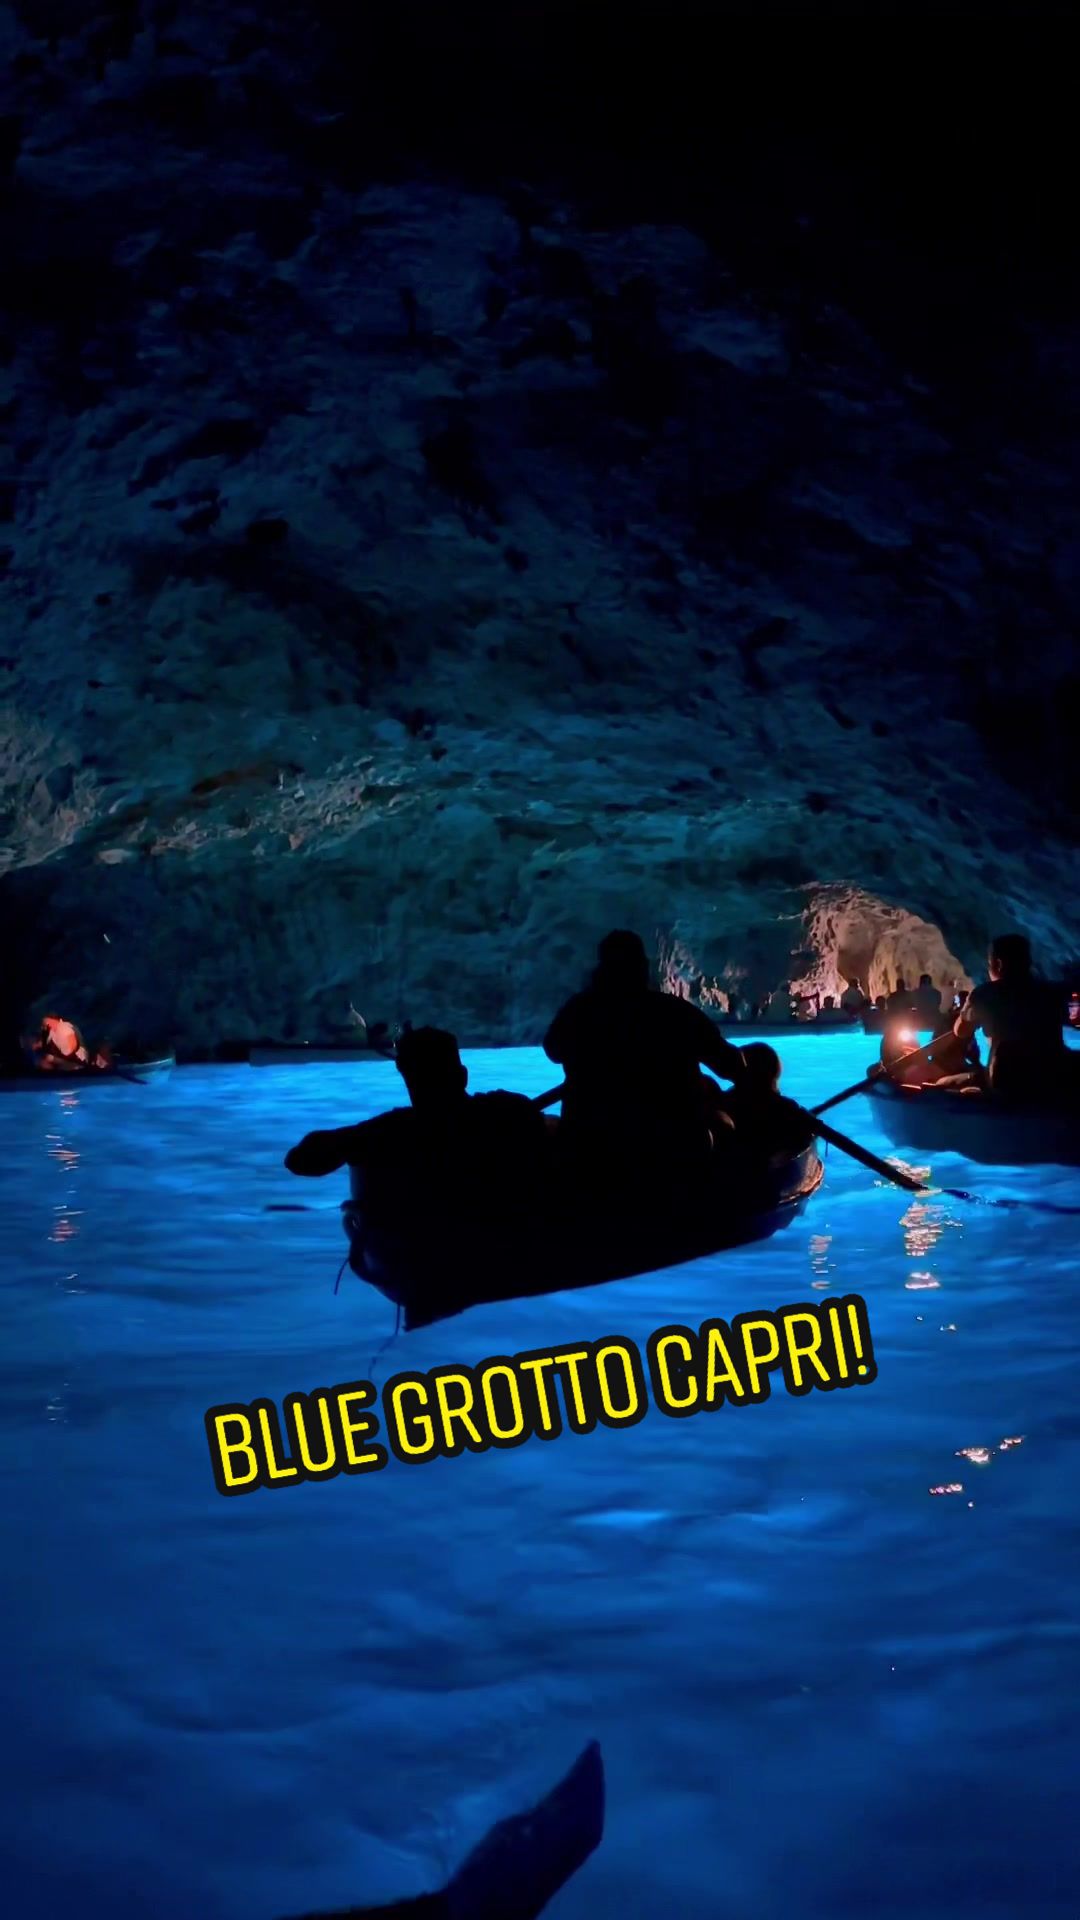 @alexojeda Tight squeeze into Blue Grotto with @Royal Caribbean in Capri, Italy!...